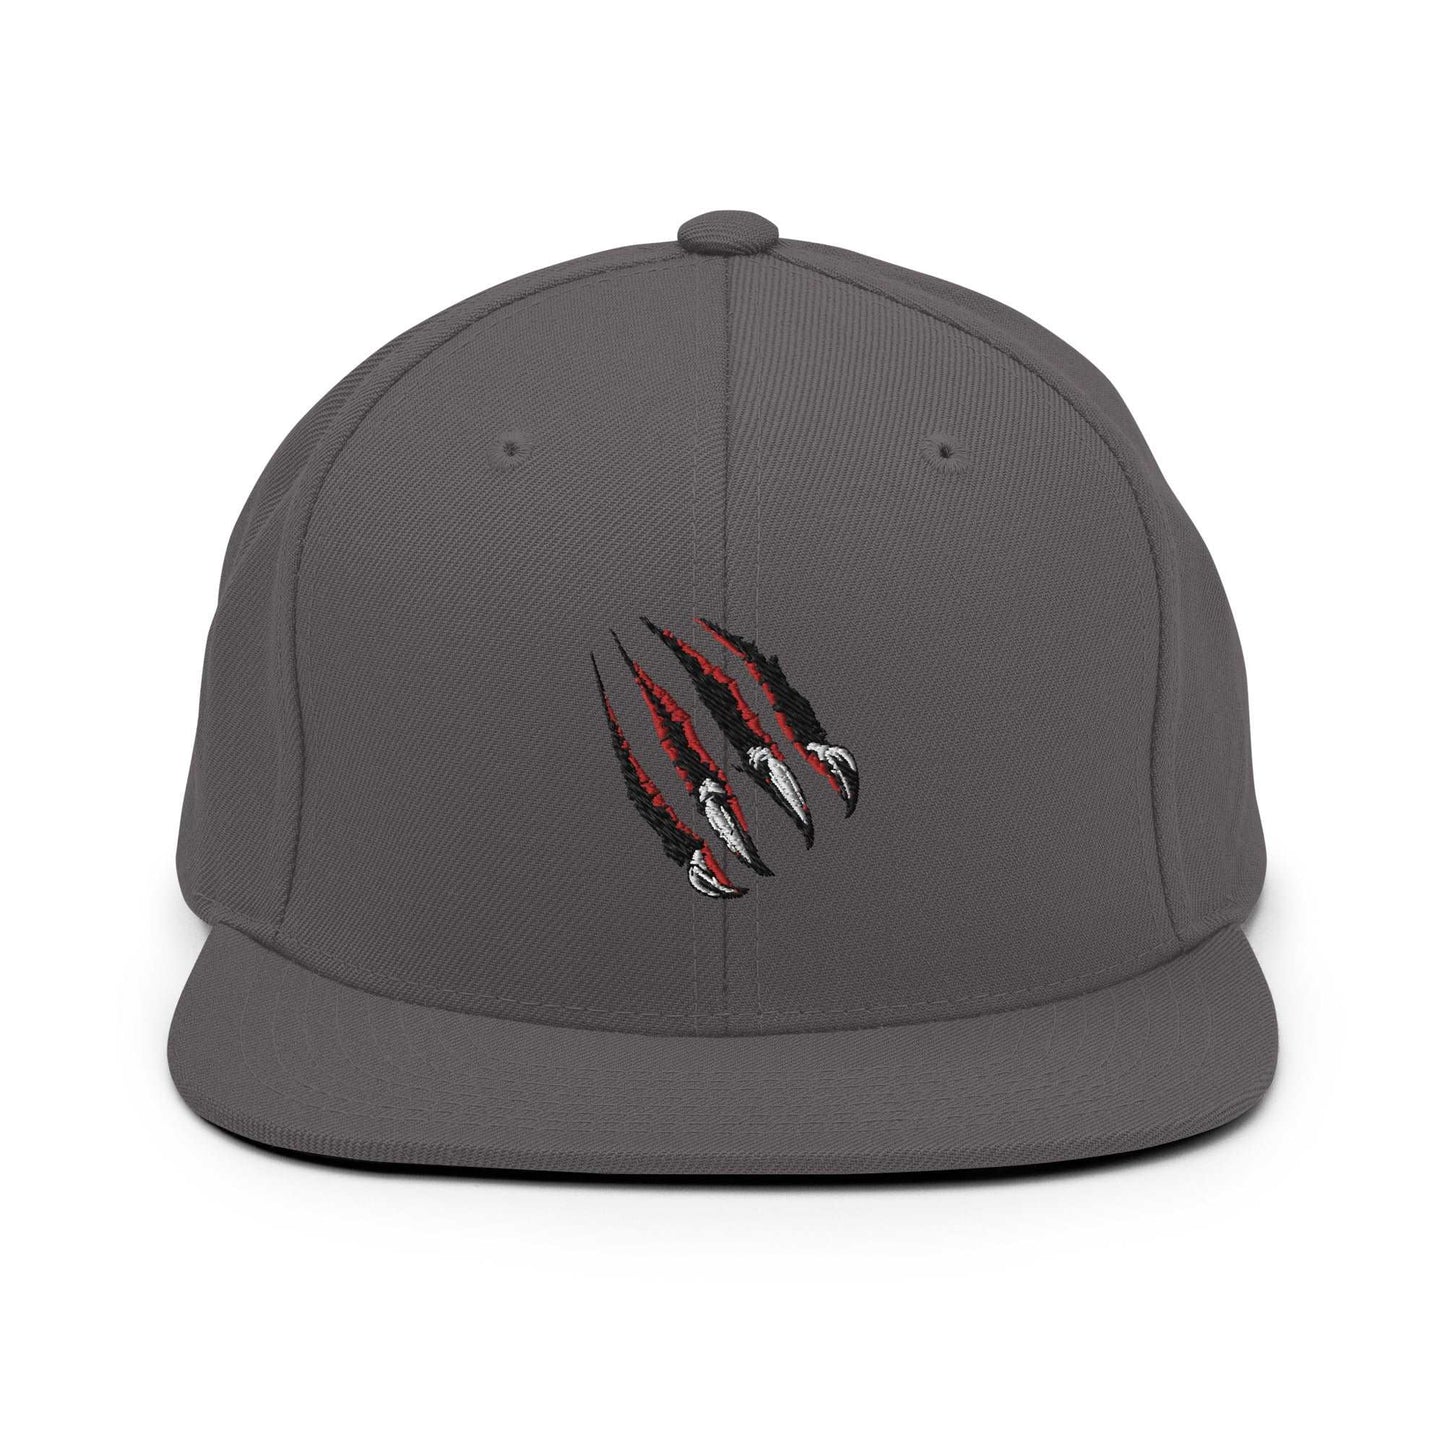 Torn Up - Embroidered Snapback Hat - Wild Style Shop